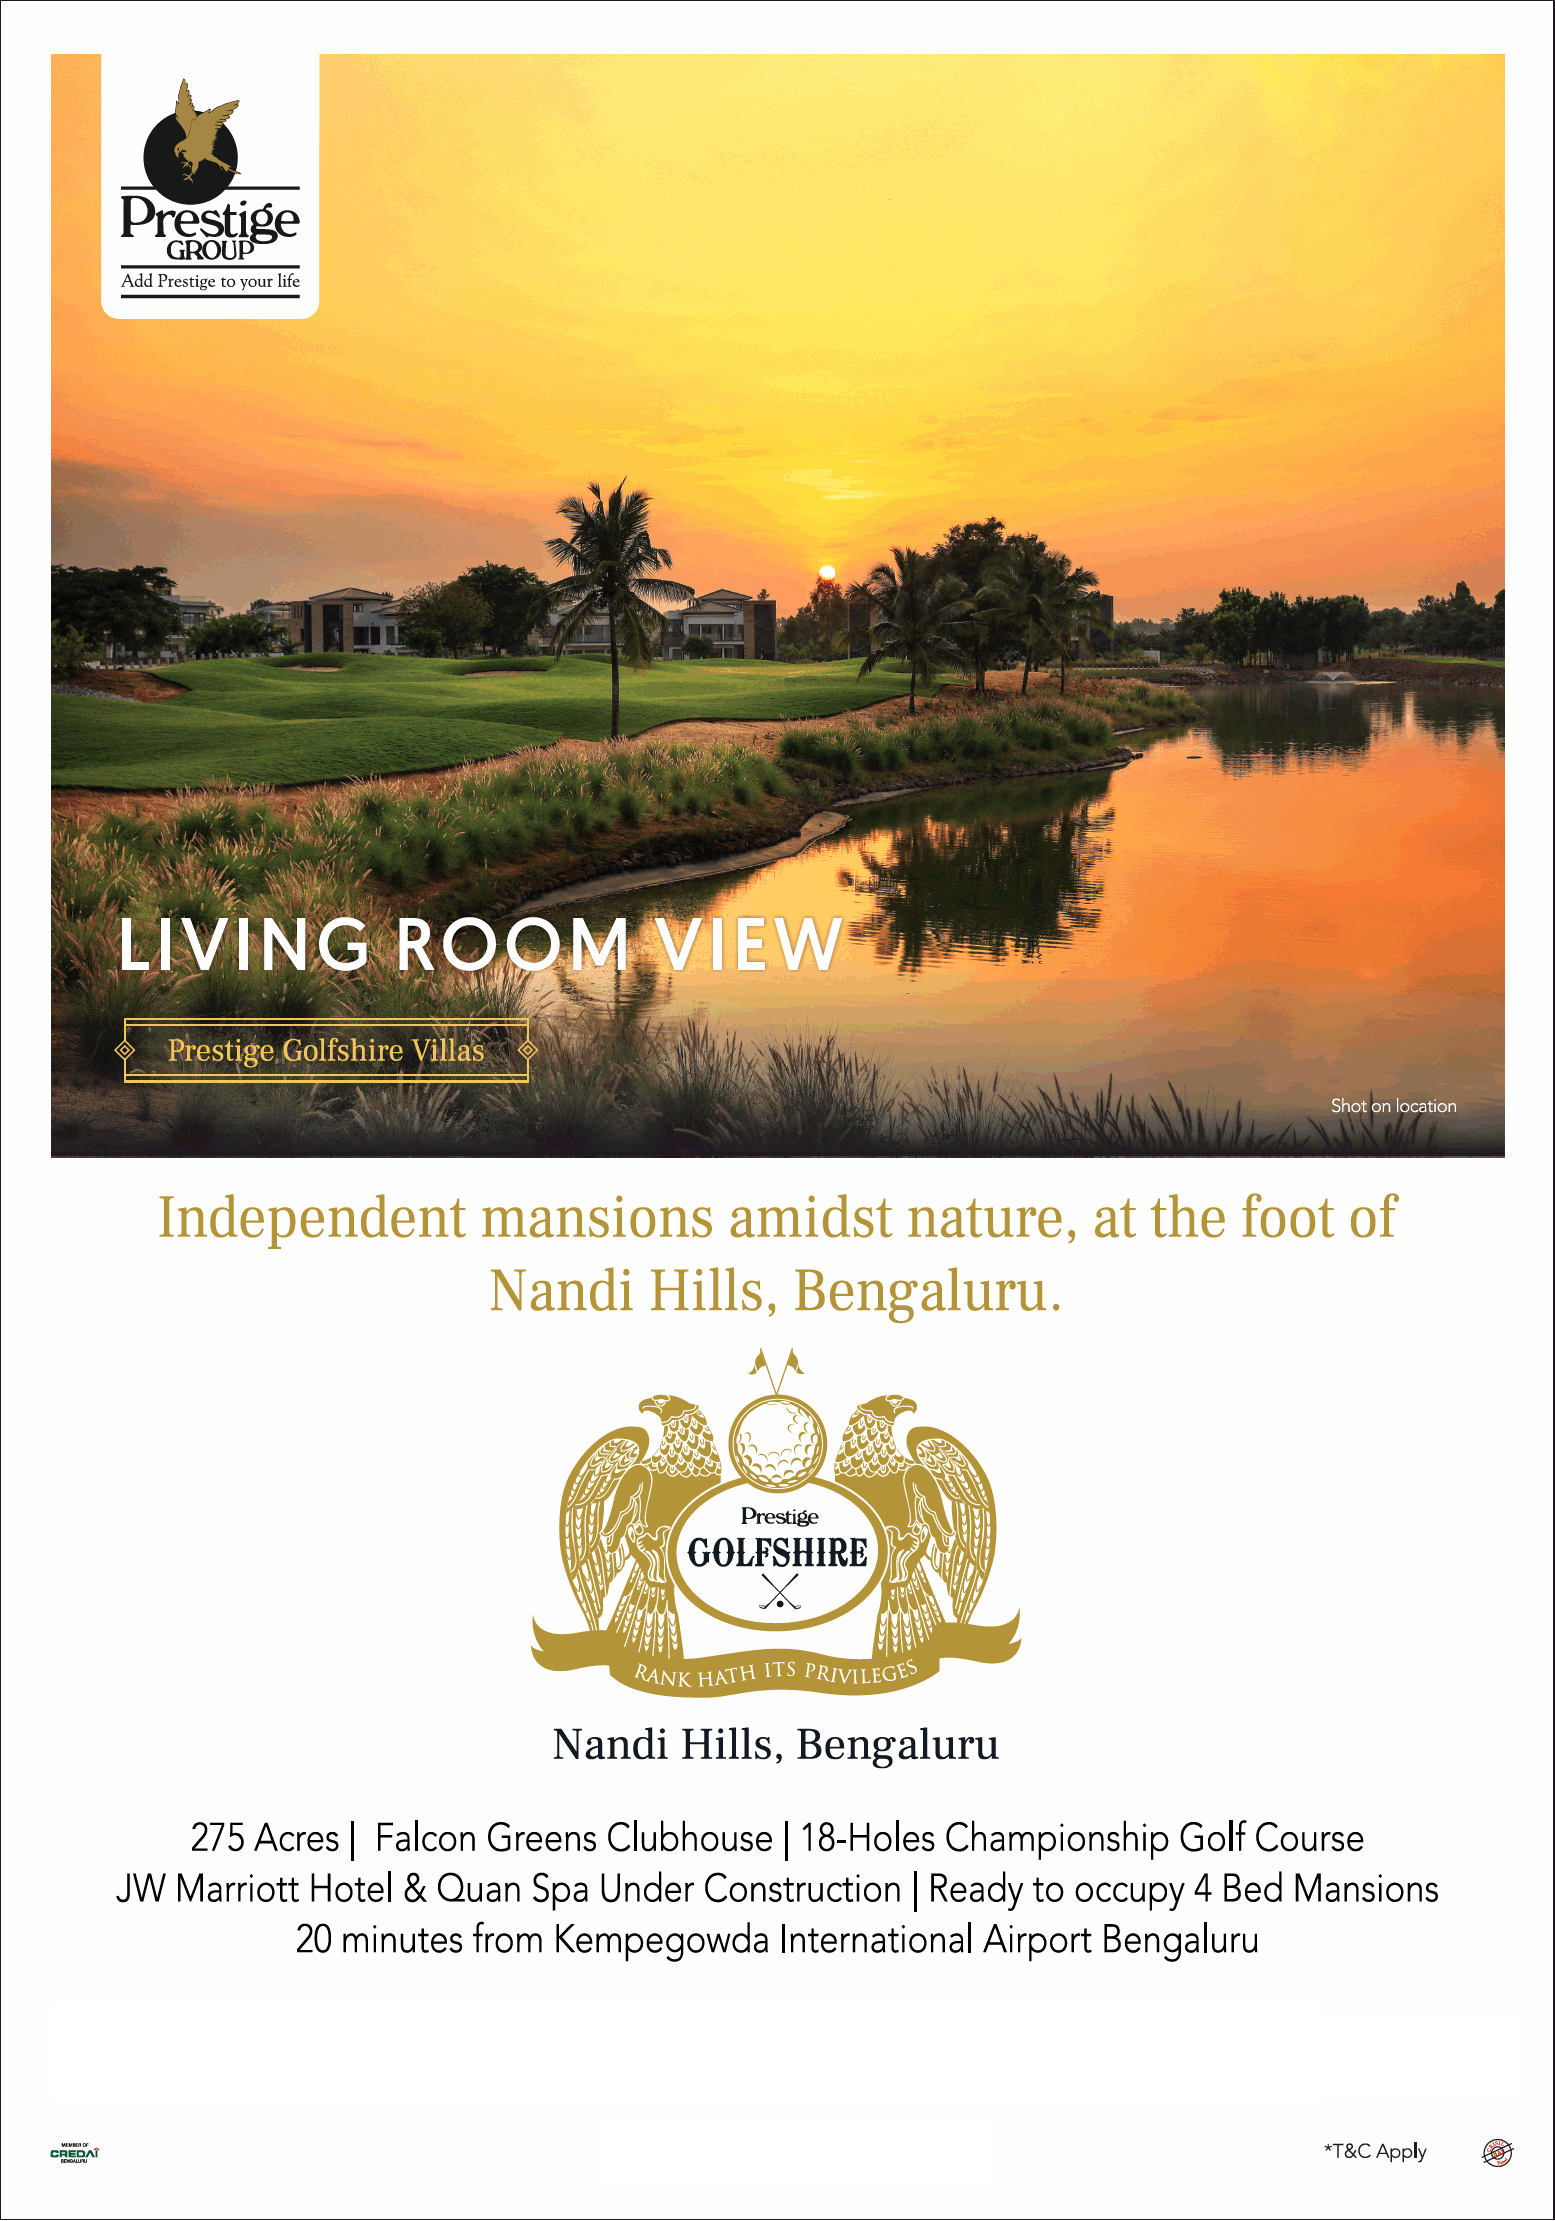 Living room view at Prestige Golfshire in Nandhi Hills, Bangalore